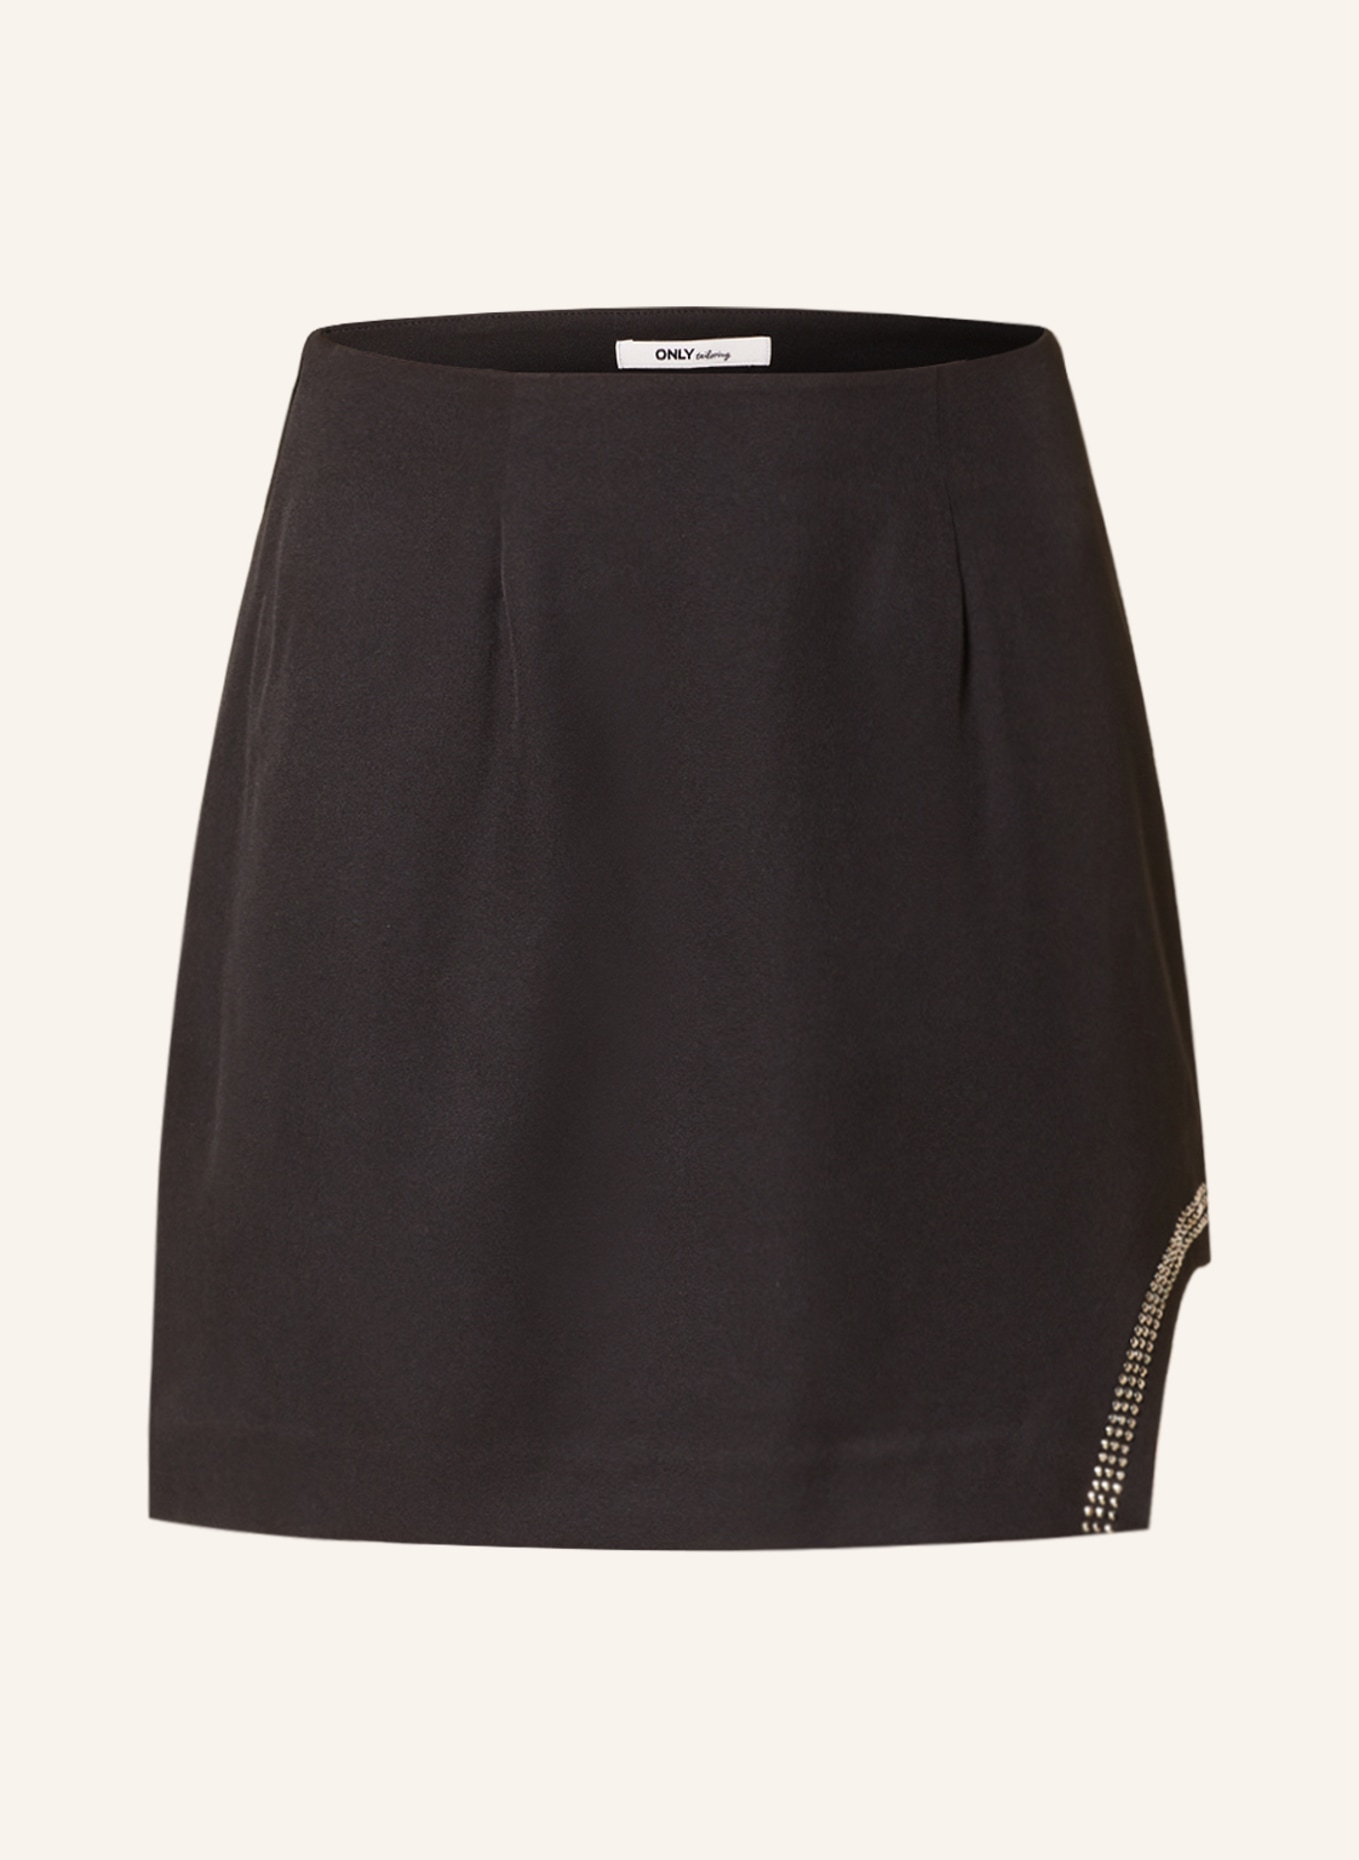 ONLY Skirt with decorative gems, Color: BLACK (Image 1)